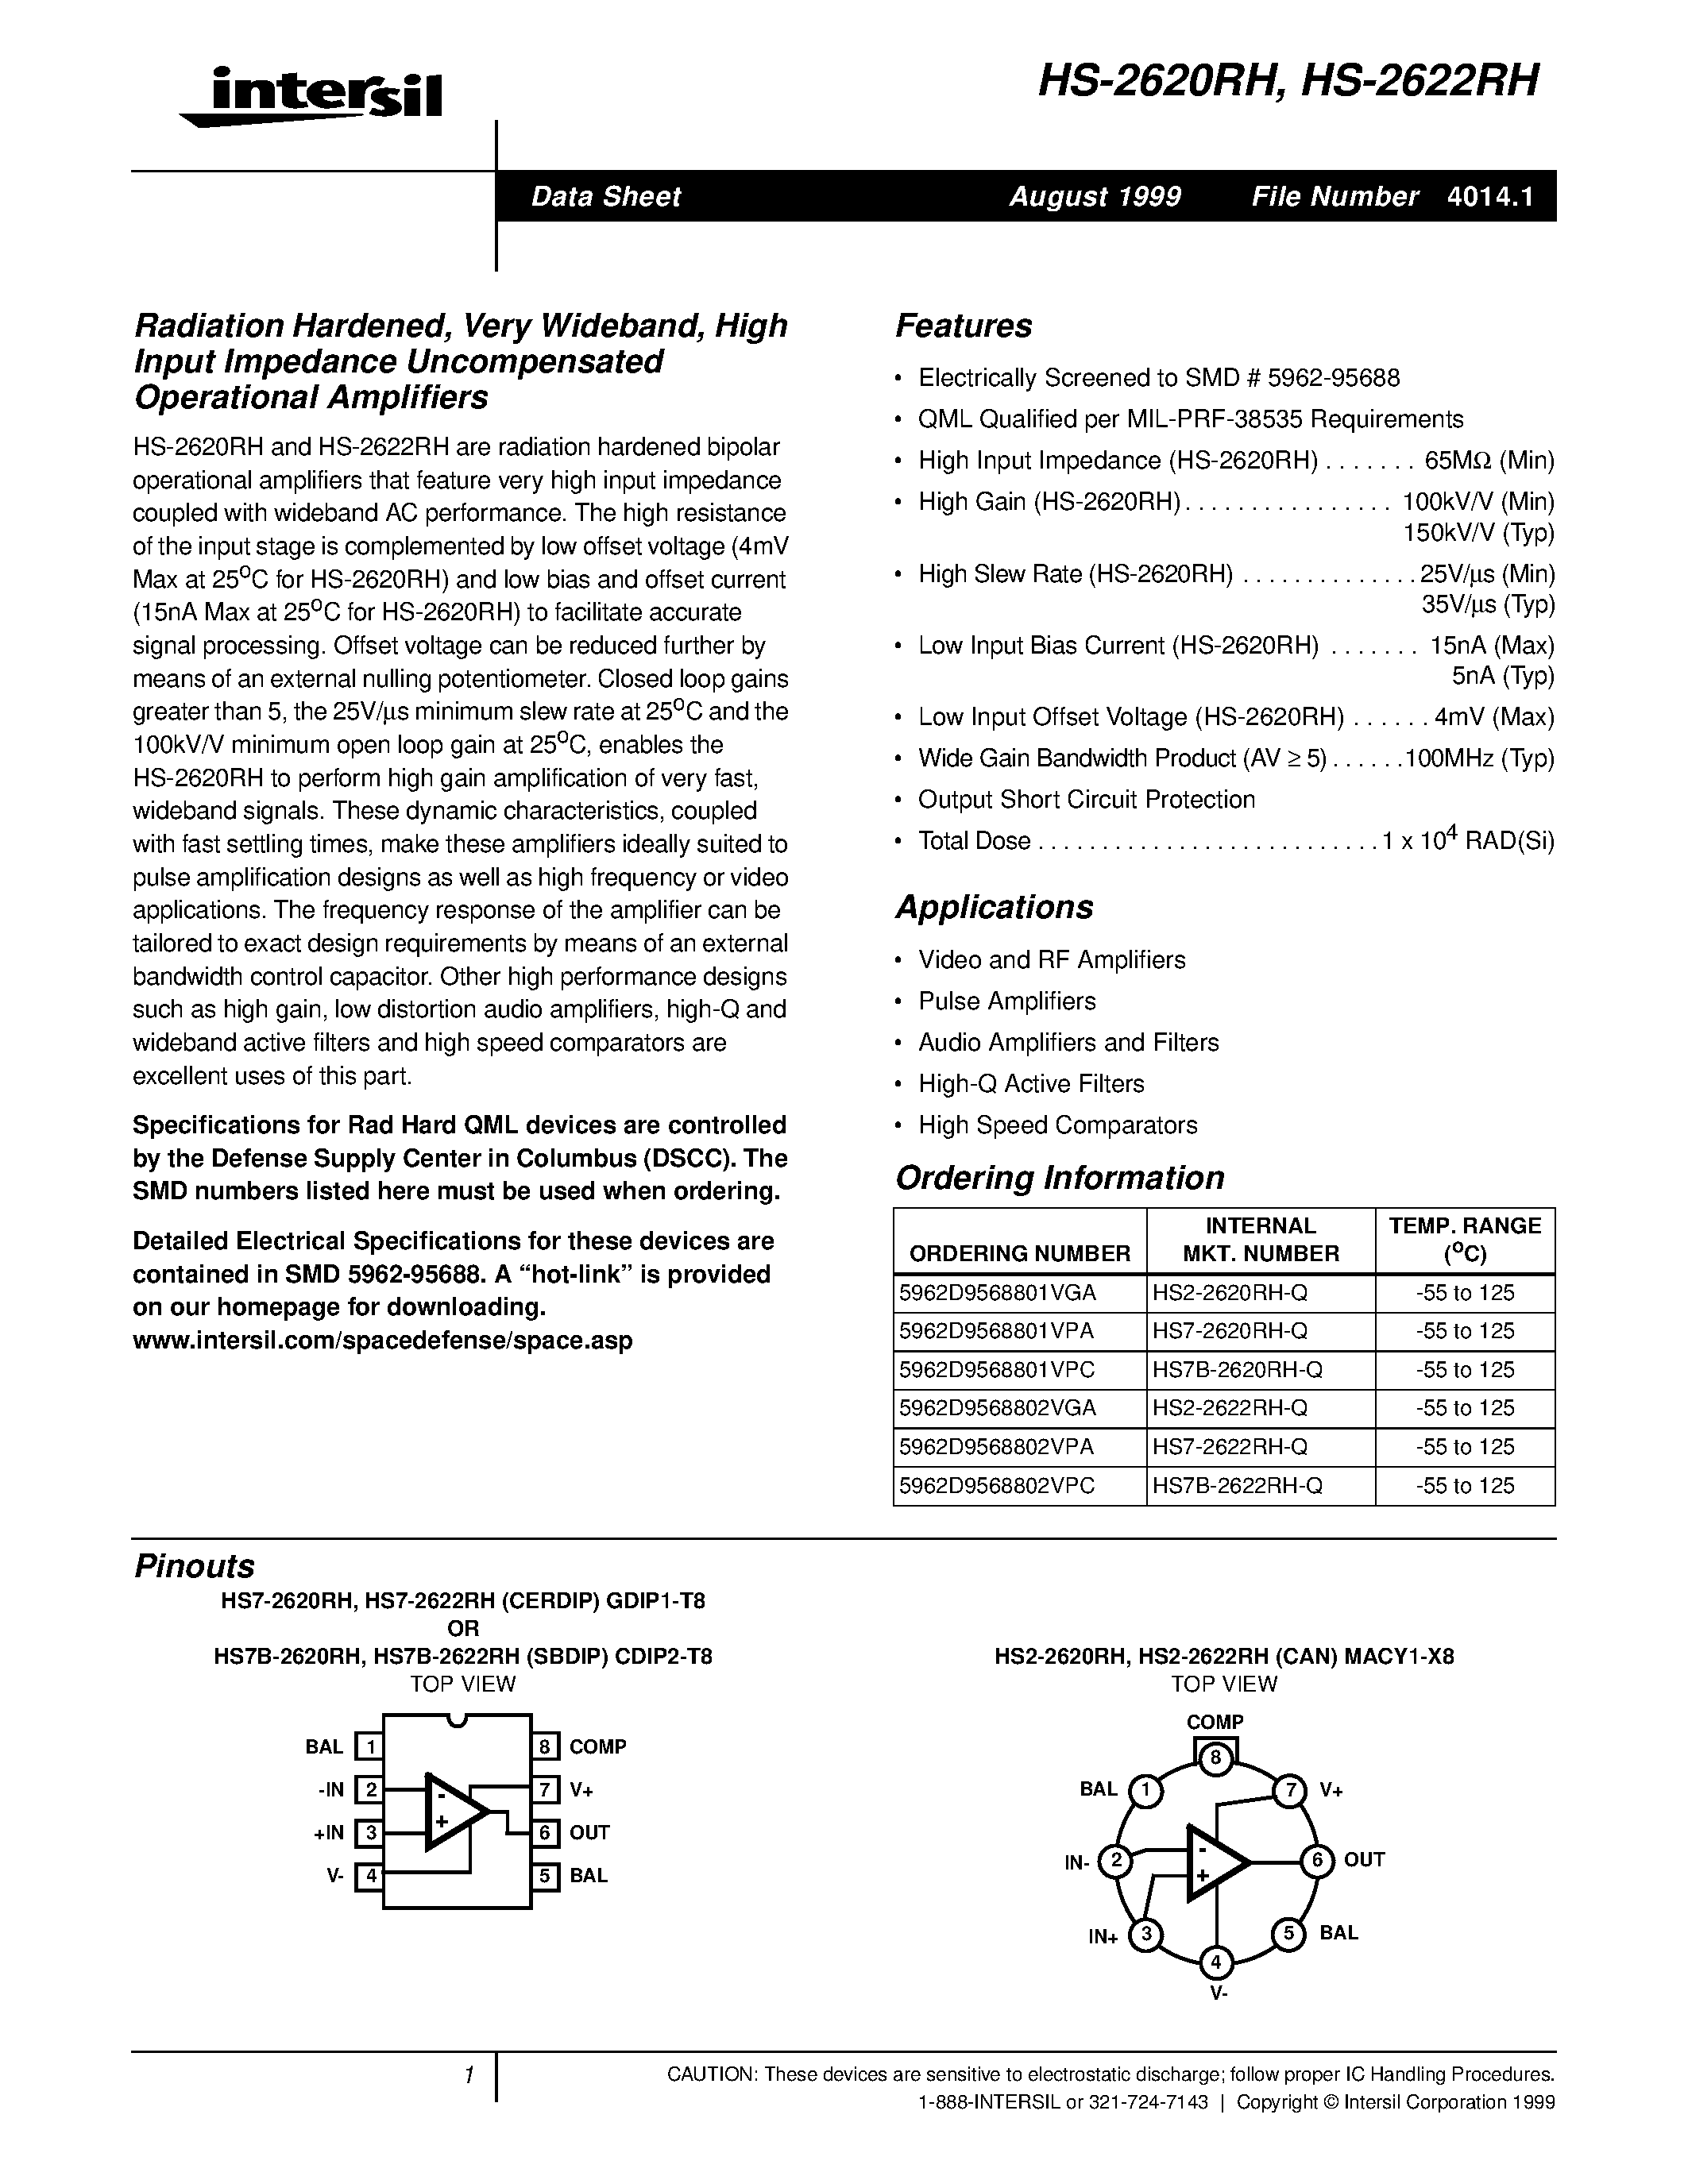 Datasheet HS7-2620RH-Q - Radiation Hardened/ Very Wideband/ High Input Impedance Uncompensated Operational Amplifiers page 1